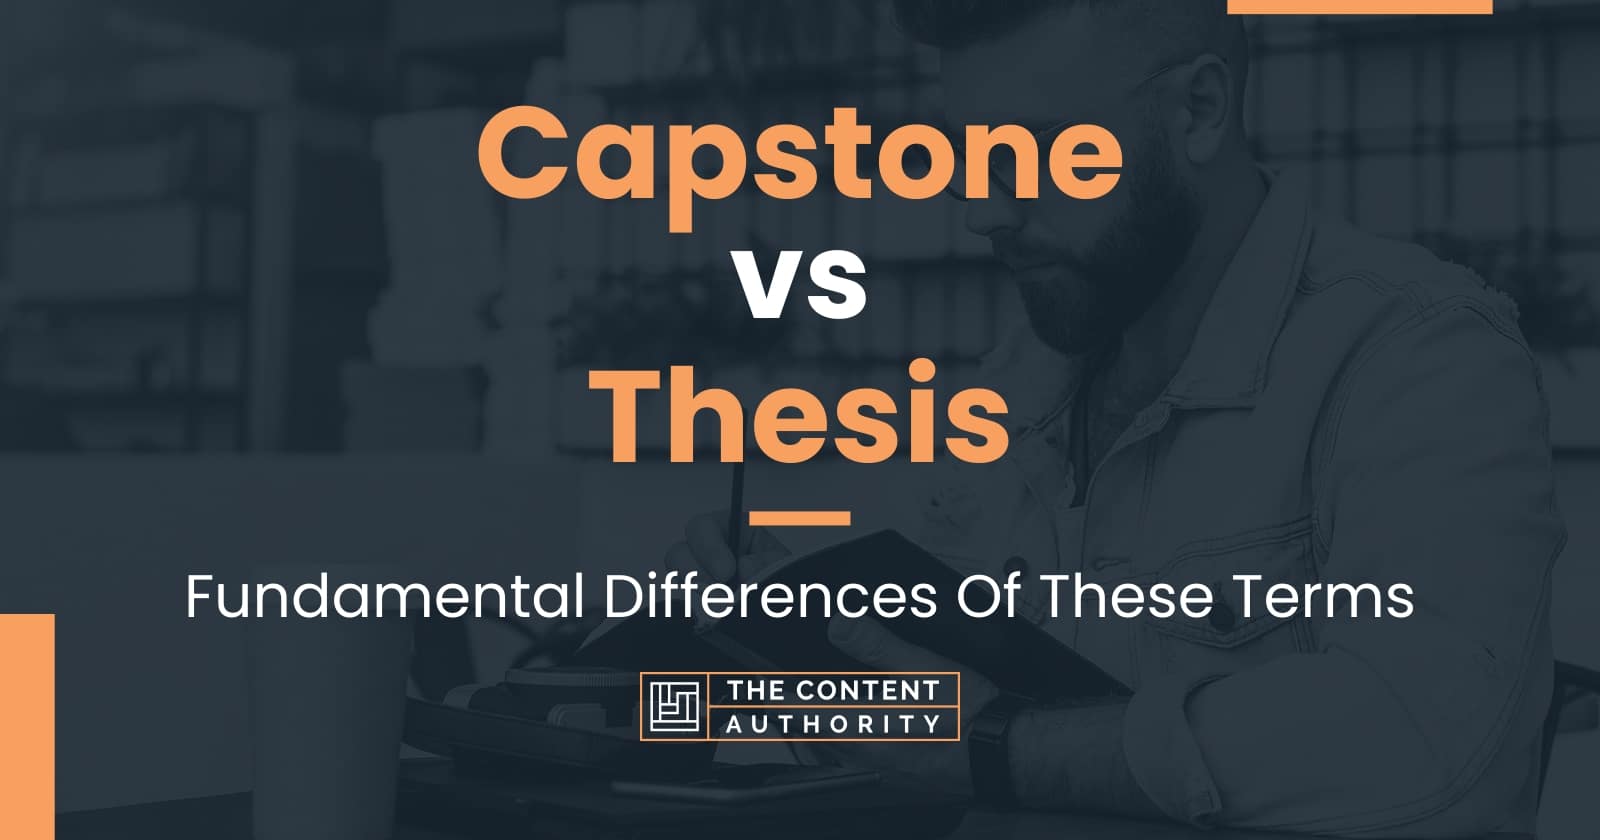 capstone and thesis